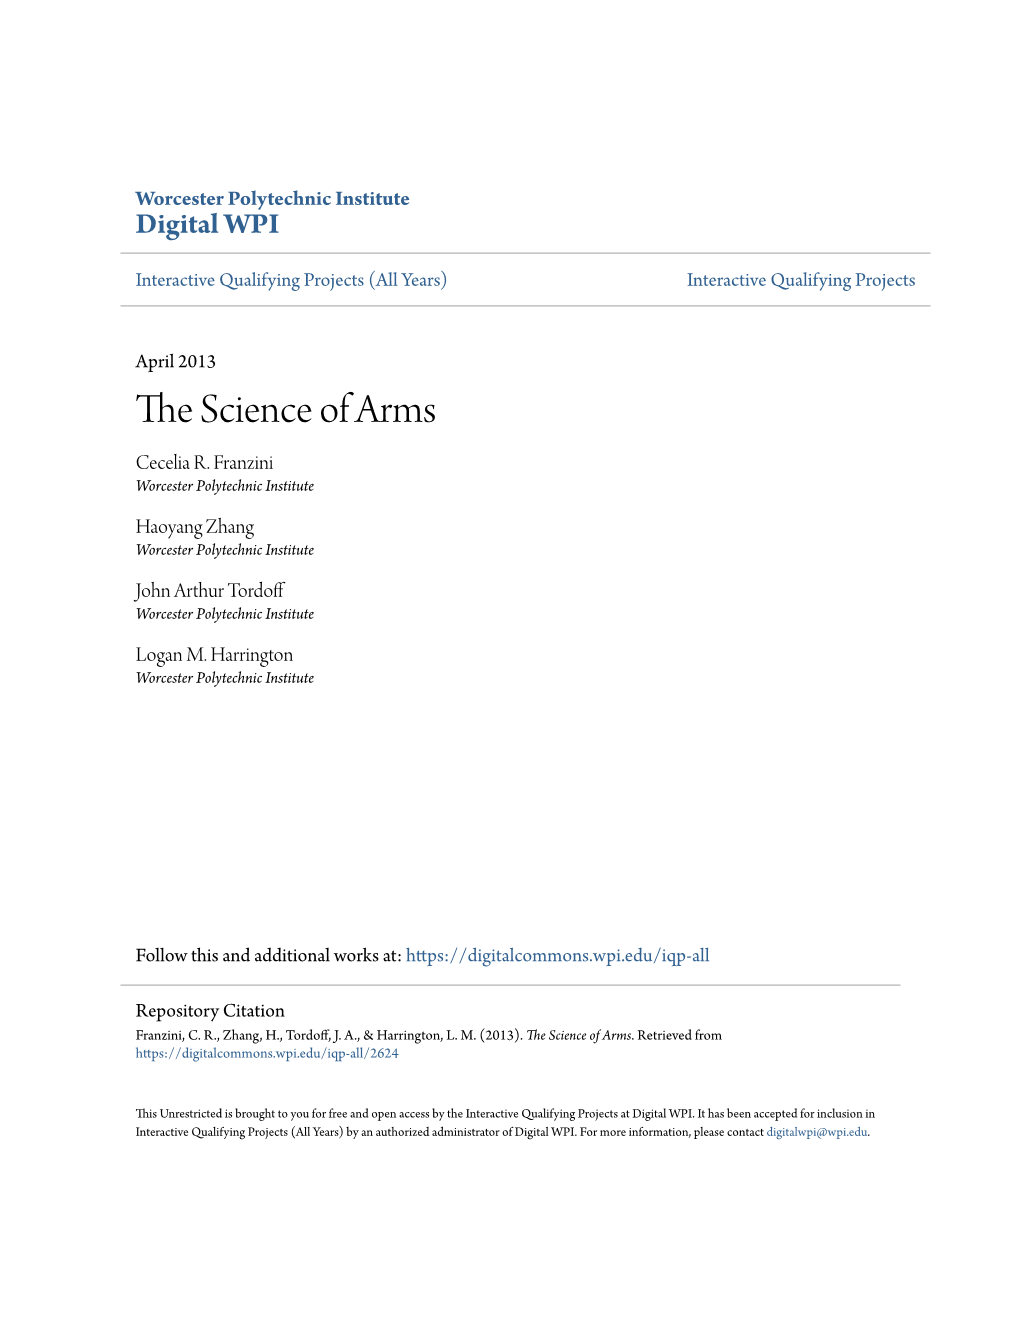 The Science of Arms